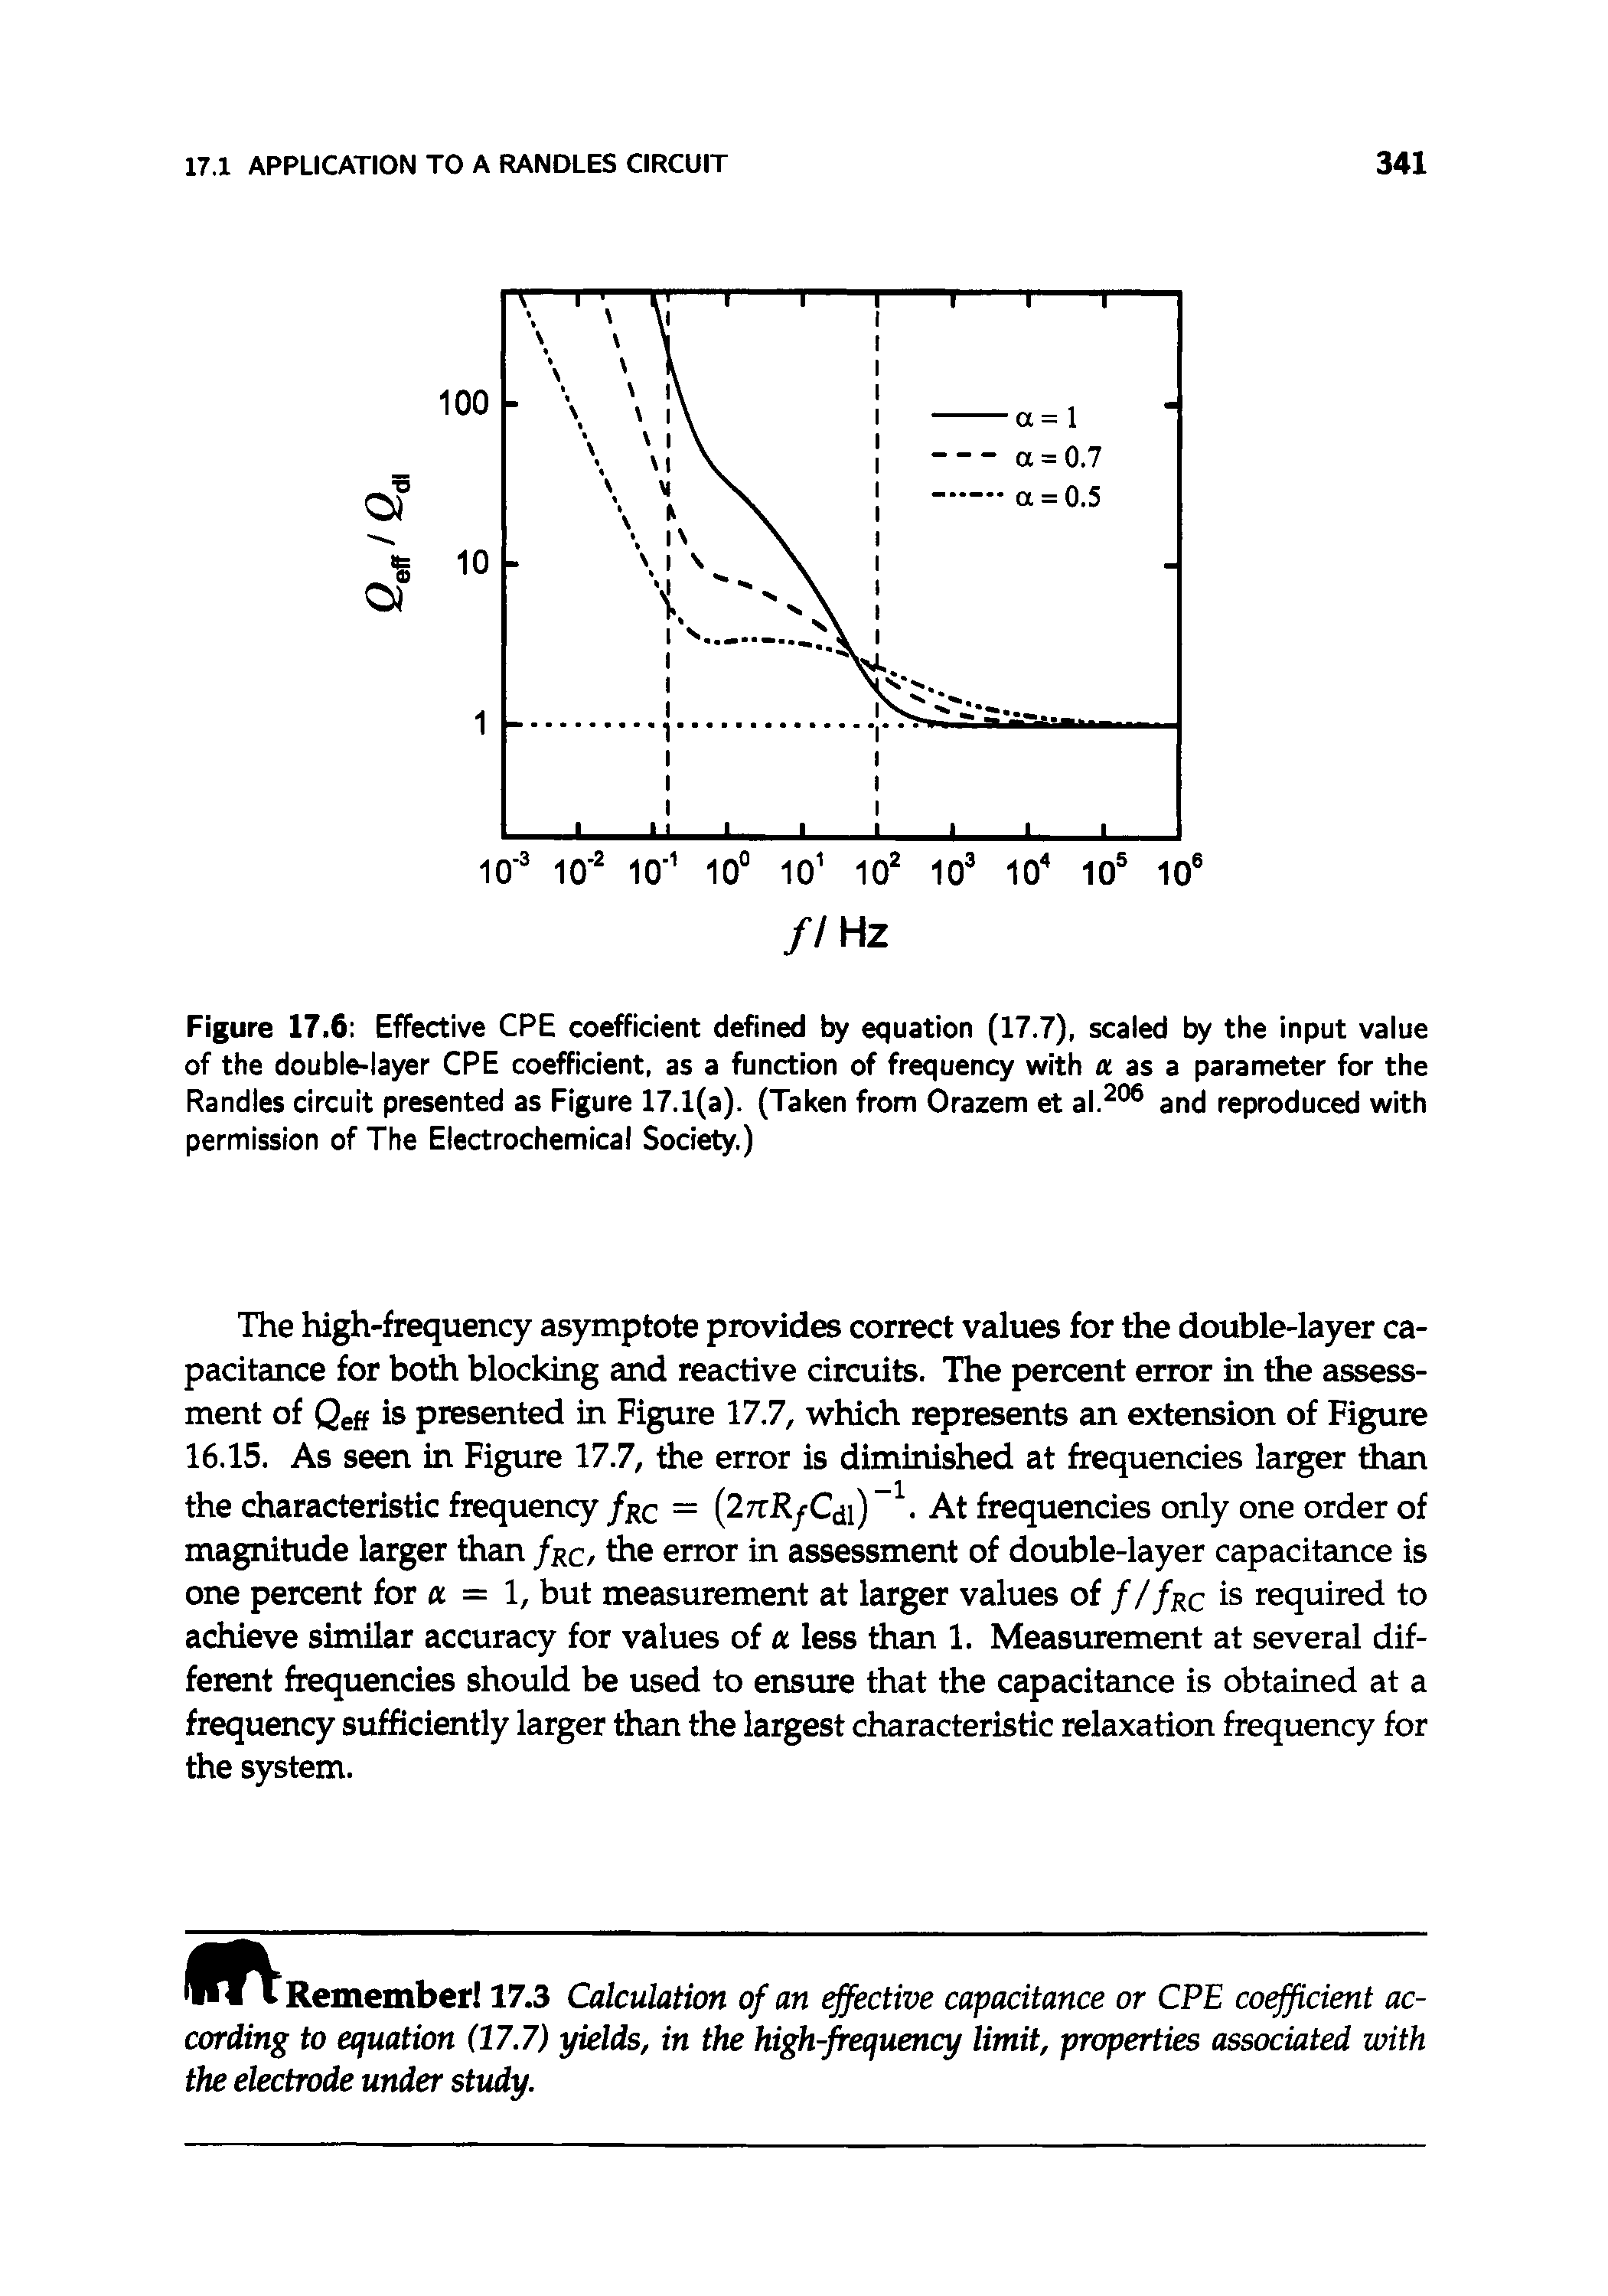 Figure 17.6 Effective CPE coefficient defined by equation (17.7), scaled by the input value of the double-layer CPE coefficient, as a function of frequency with a as a parameter for the Randles circuit presented as Figure 17.1(a). (Taken from Orazem et al. and reproduced with permission of The Electrochemical Society.)...